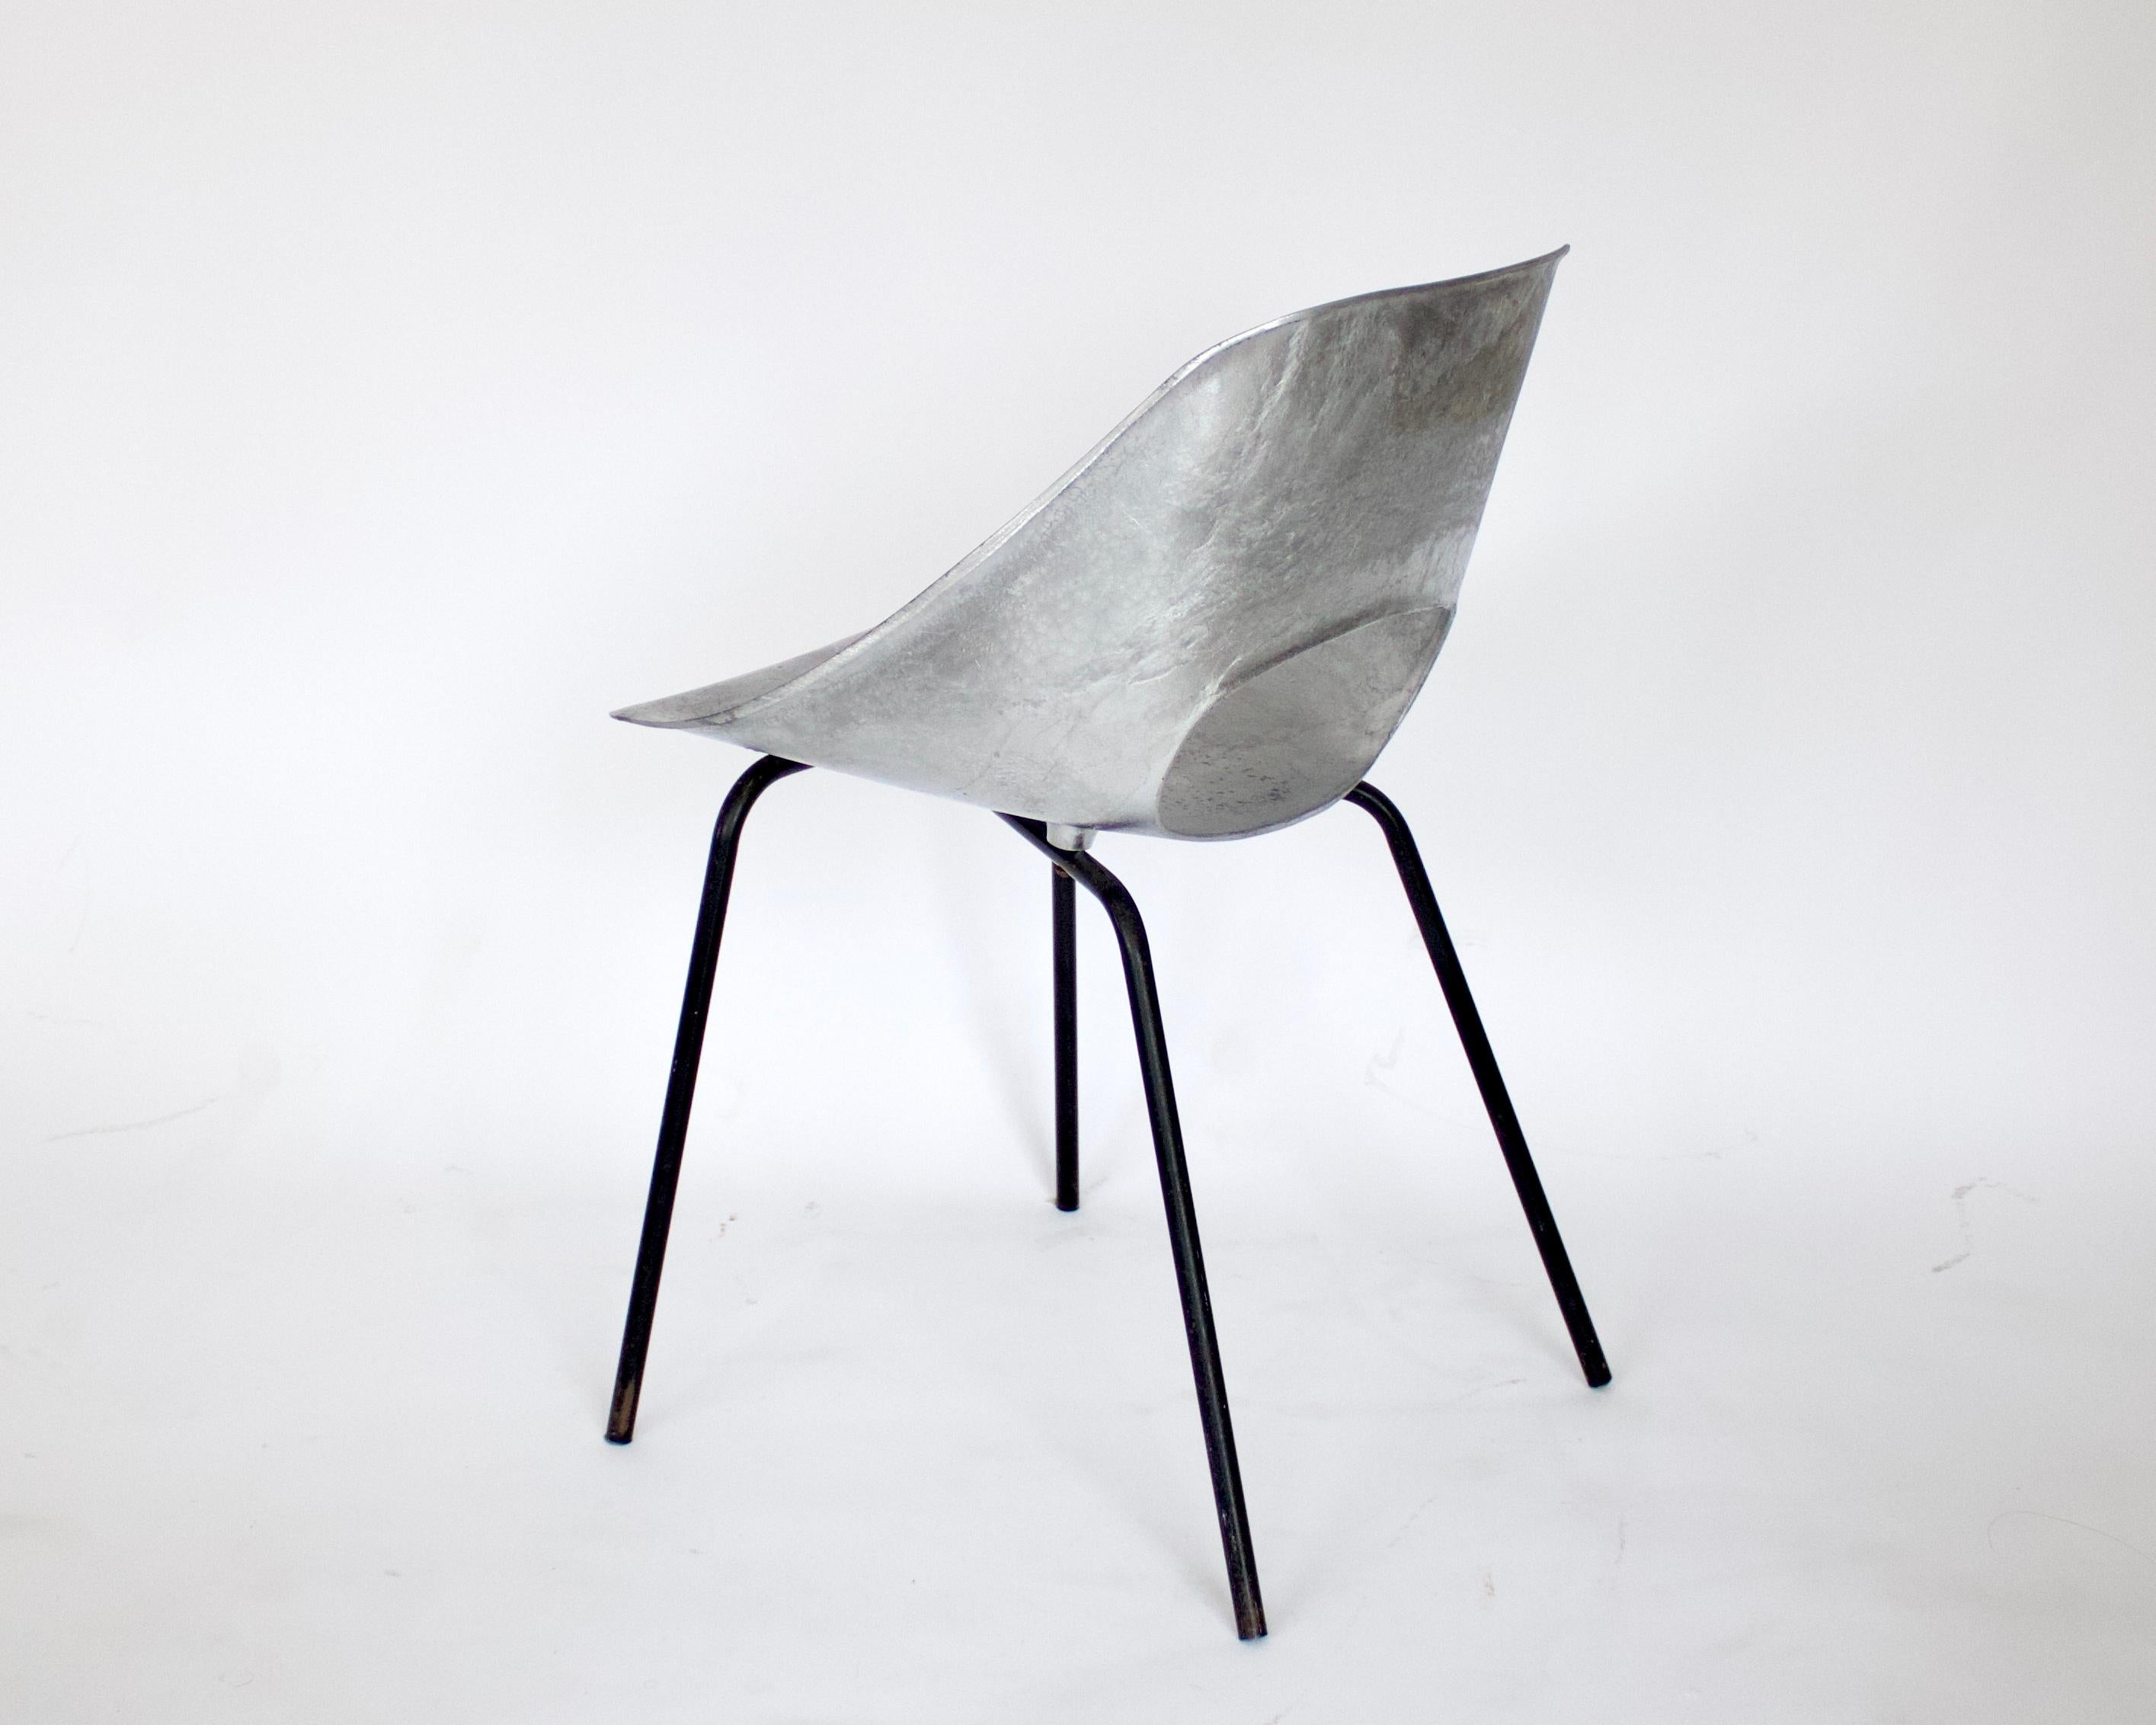 Mid-20th Century Pierre Guariche Cast Aluminum Tulip Chairs for Steiner, France, circa 1954